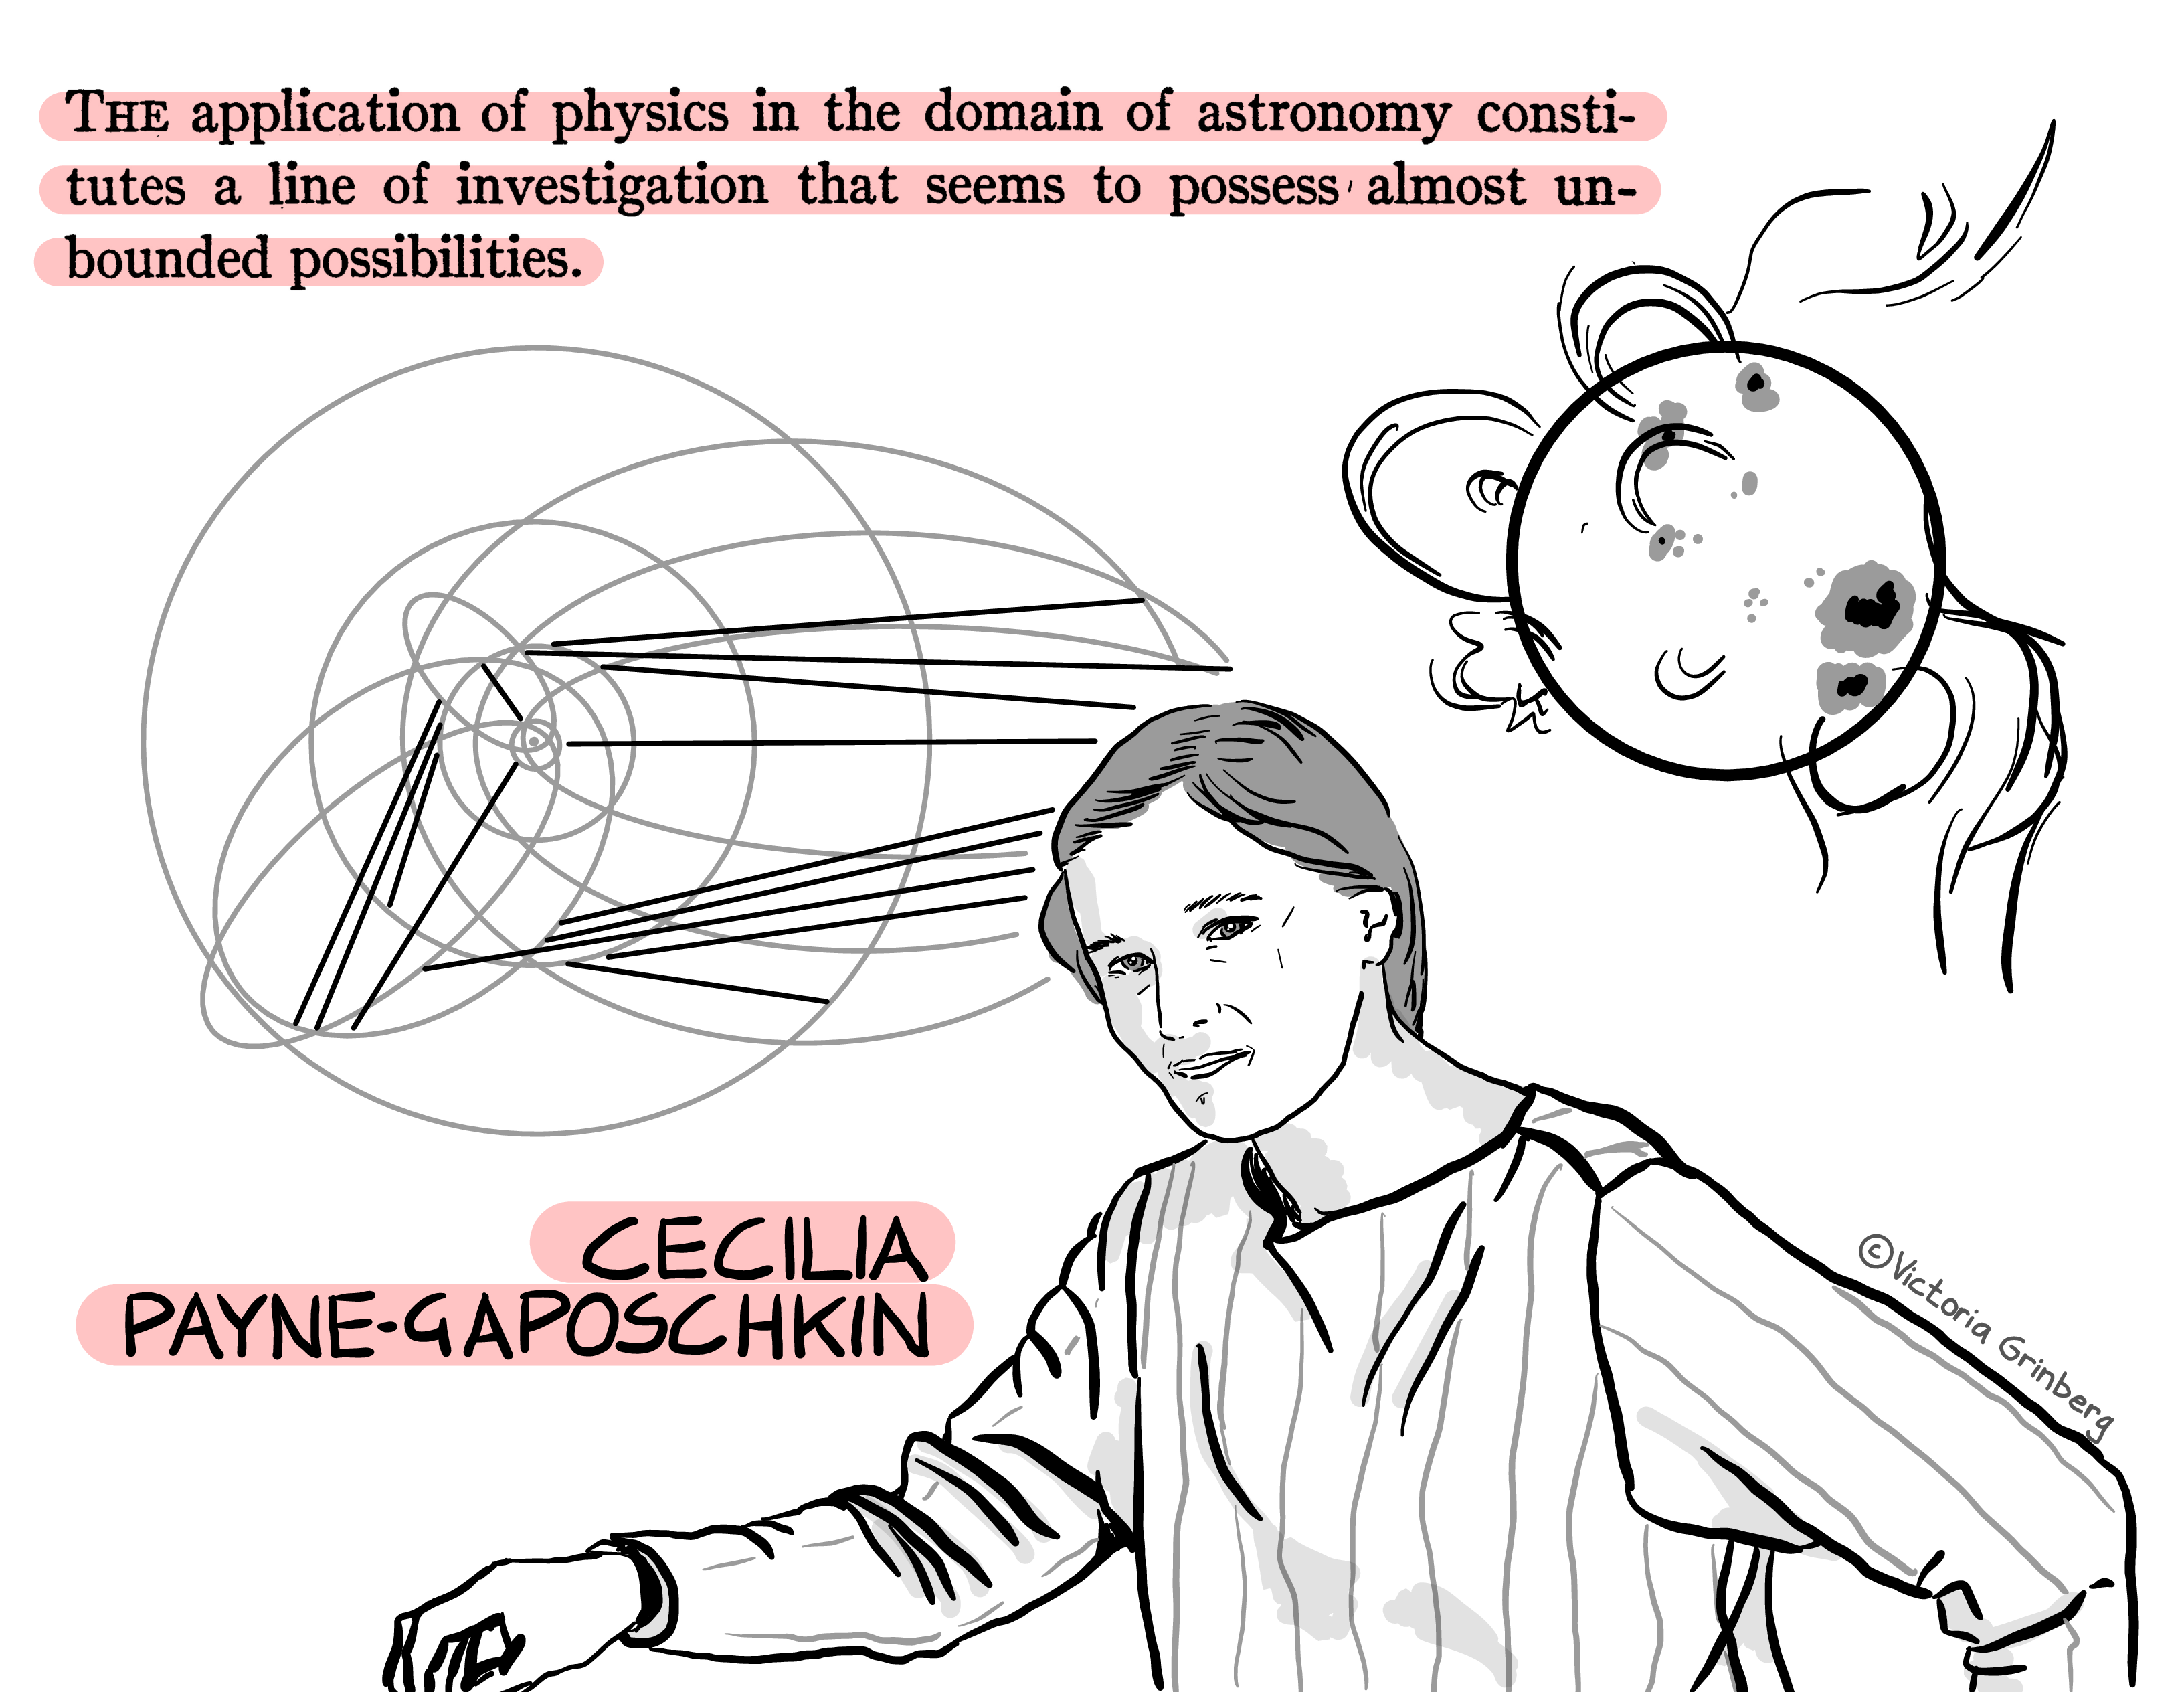 My black and white and grey digital sketch of Cecilia Payne Gaposchkin. Above it, a citation from her thesis: 'The application of physics in the domain of astronomy constitutes a line of investigation that seems to possess almost unbounded possibilities'. Slightly in the background sketches of the energy levels in the hydrogen atom (orbital co-sketched) and a star with sun spots and loop/protuberances. Name and citation underlines in red, everything else is black and white.